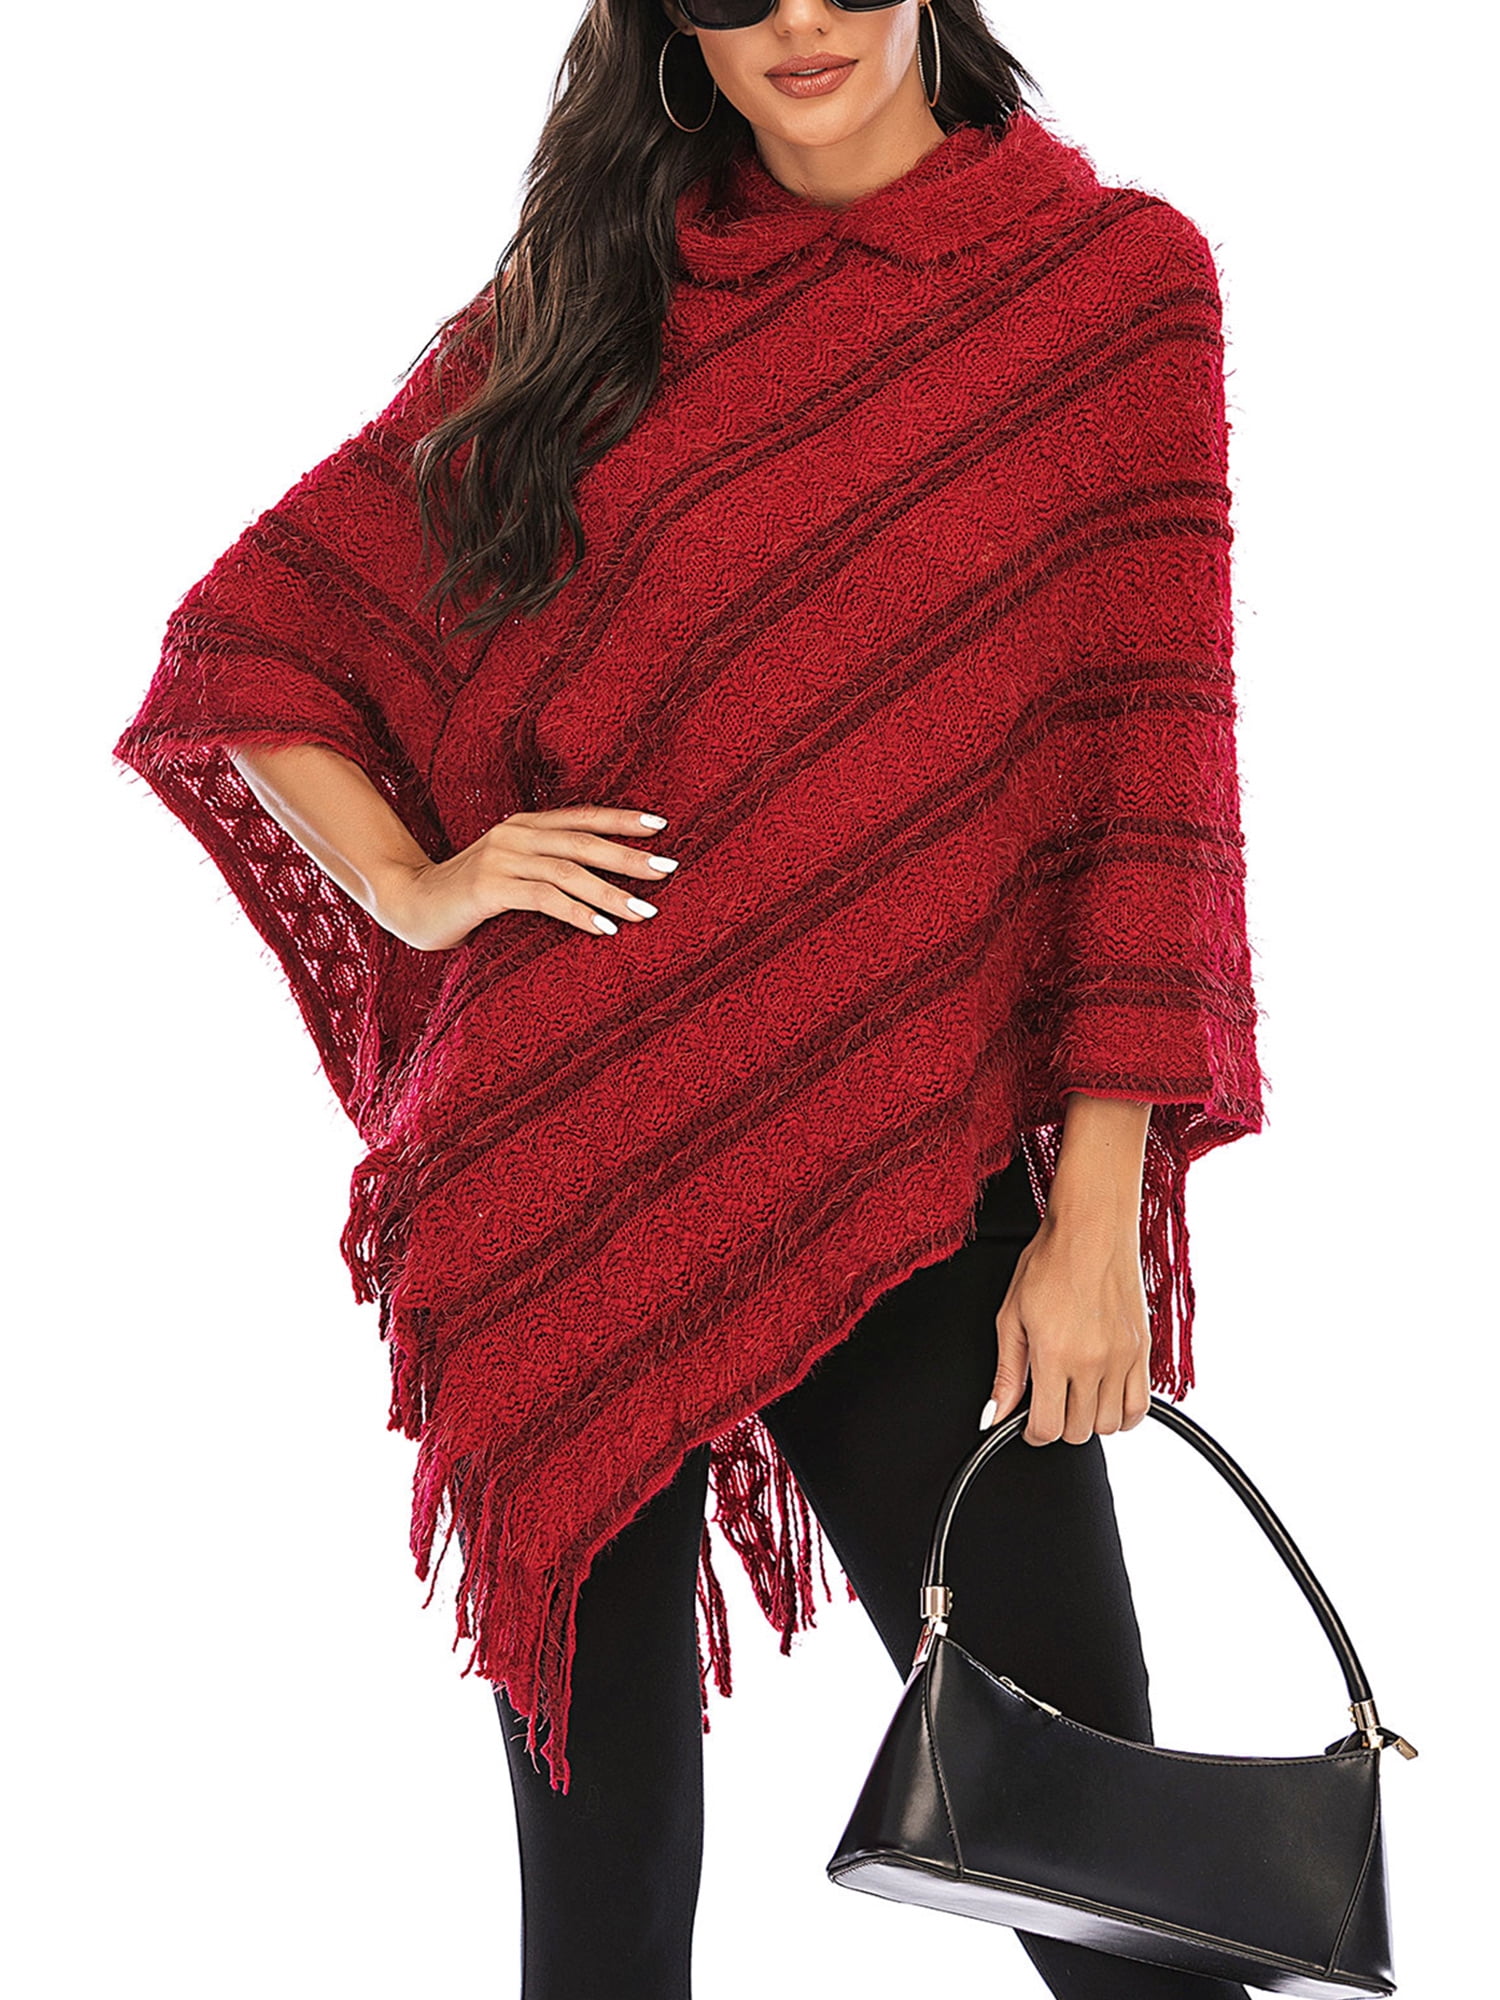 Soft and Luxurious Fringed Shoulder WrapShawl with Button closure Shawl Wrap